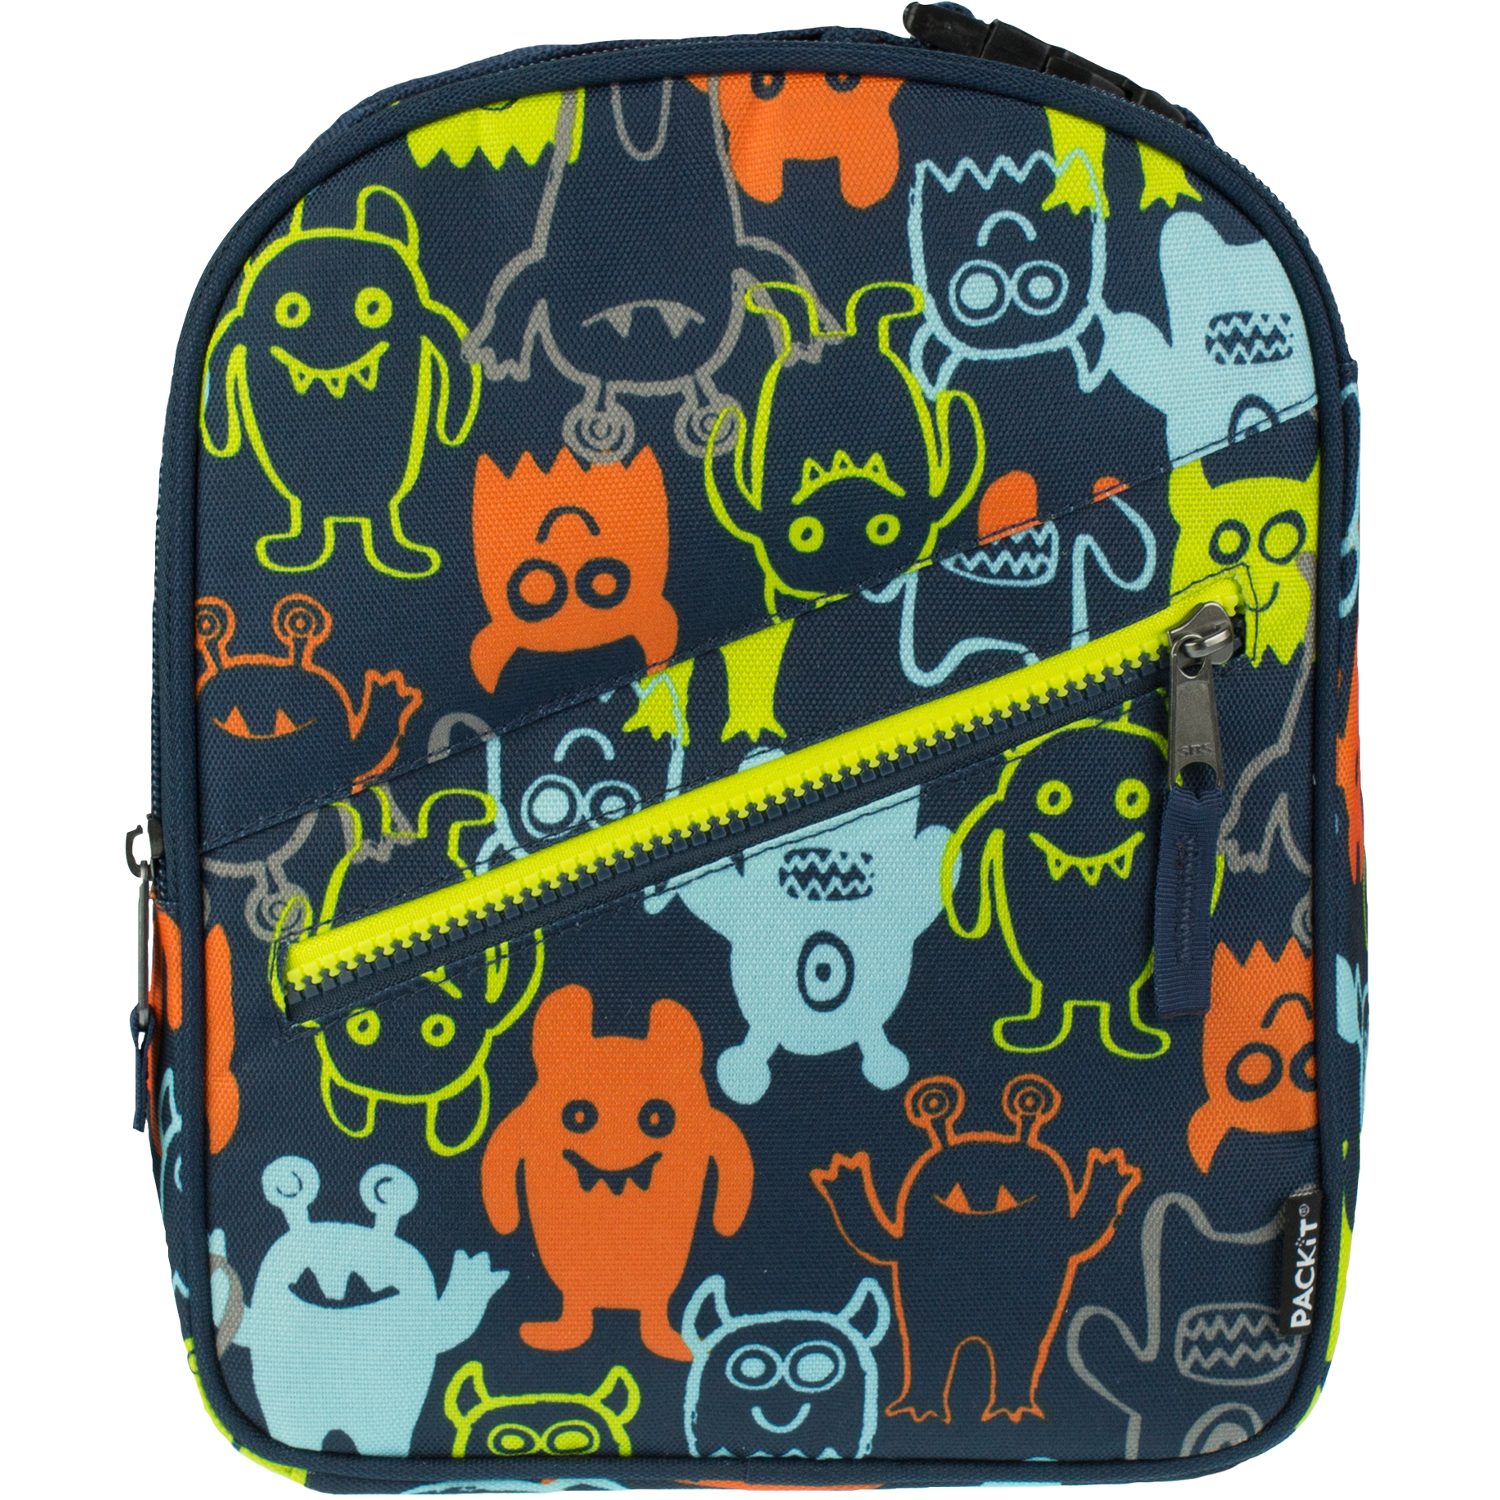      Upright lunch box Monsters, 4.0  (PACKiT PACKIT0033)